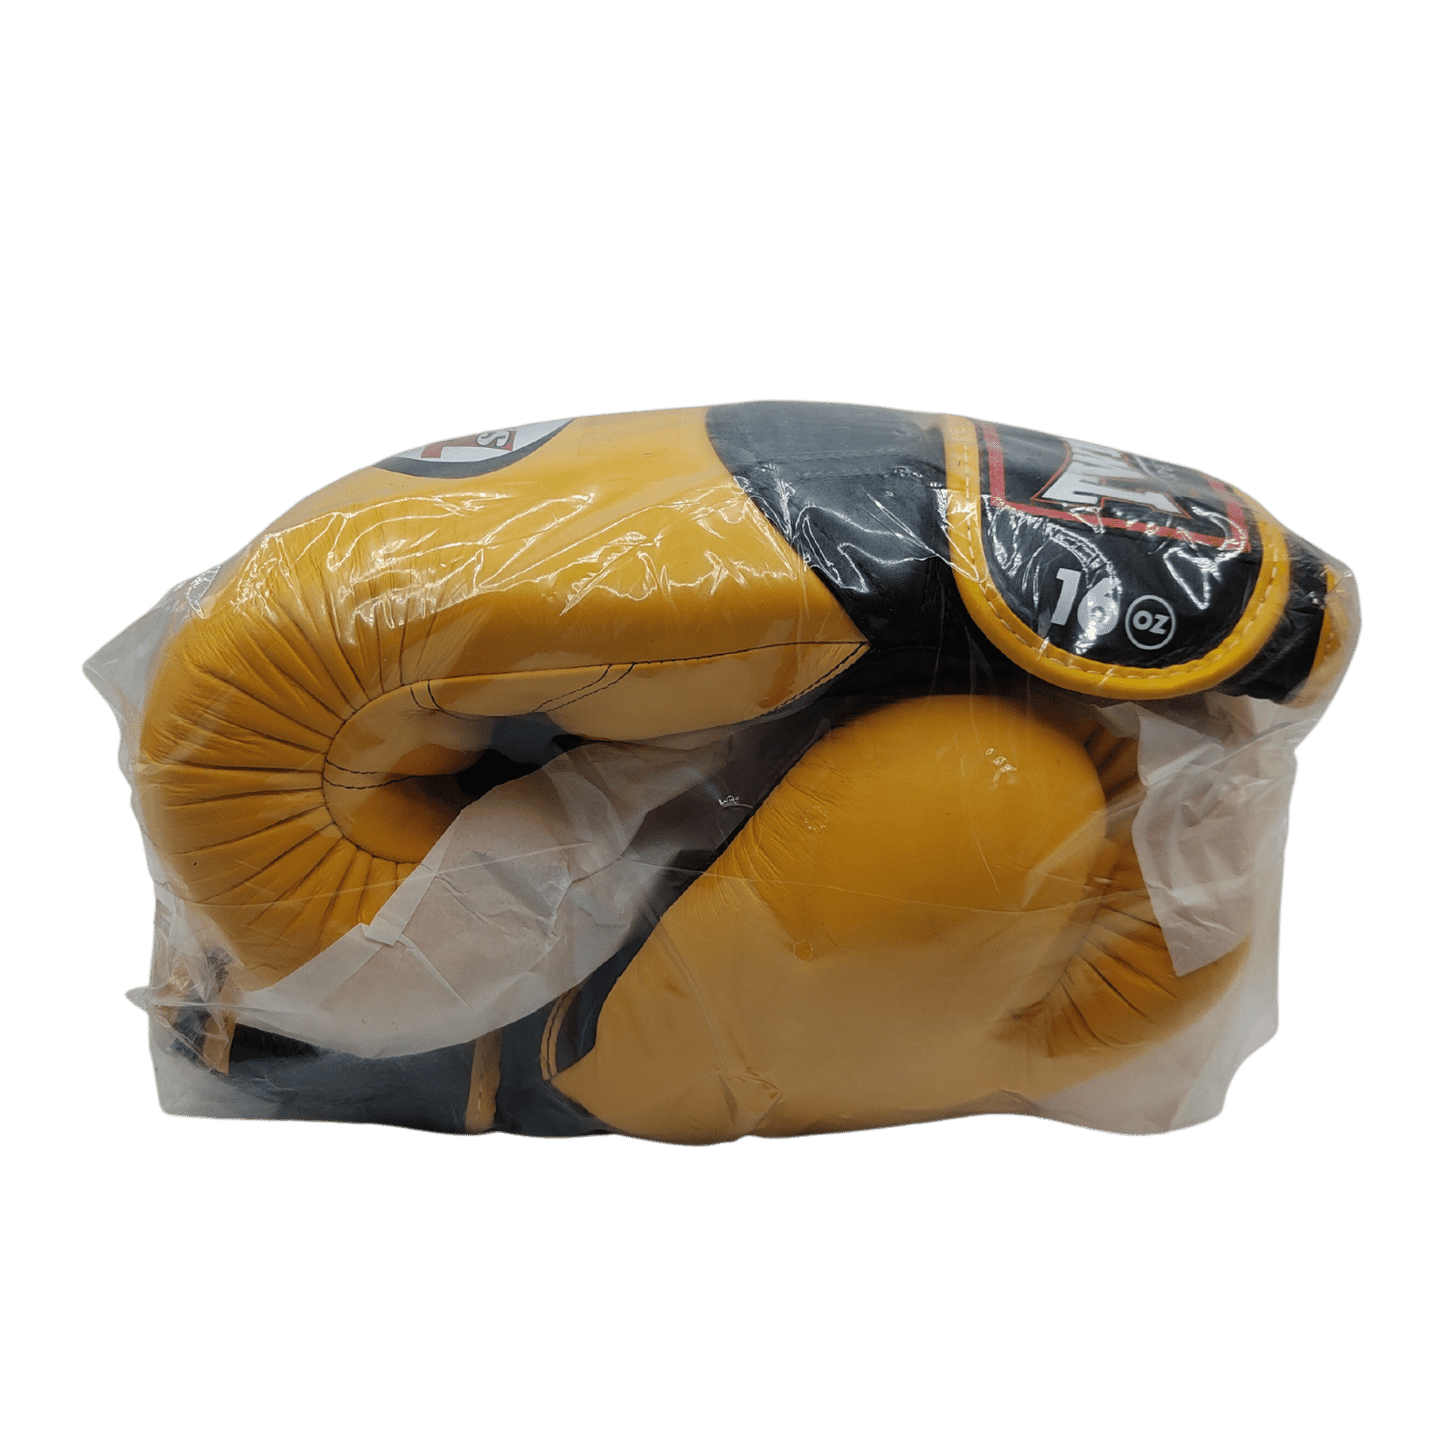 A pair of Twins Duo Colour 16oz Boxing Gloves - Yellow & Black in a plastic bag, perfect for Muay Thai training at Al's Gym.